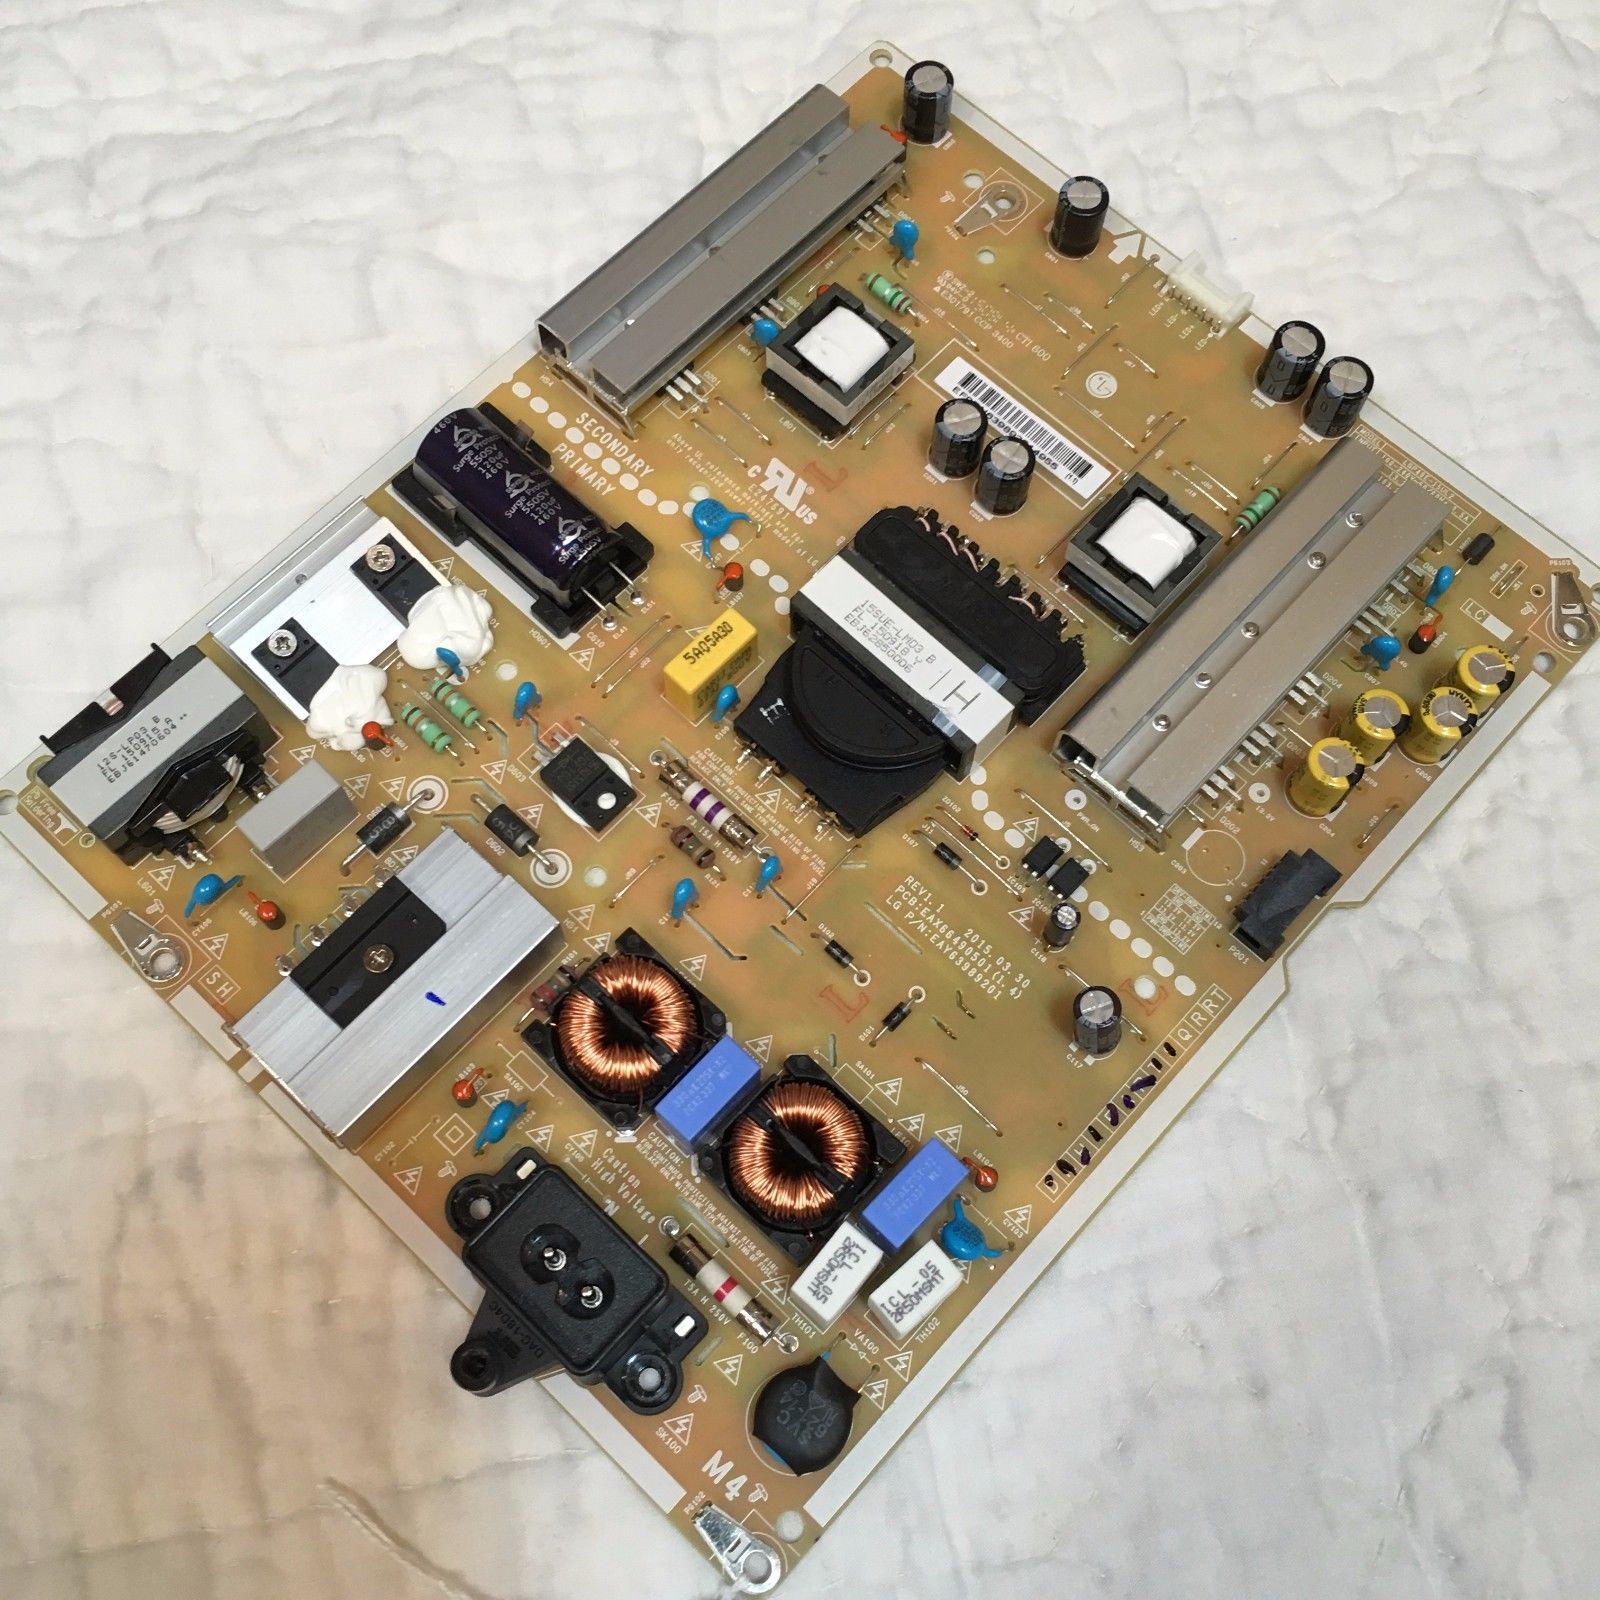 LG EAY63989201 POWER SUPPLY BOARD FOR 49UF6430-UB AND OTHER MODEl